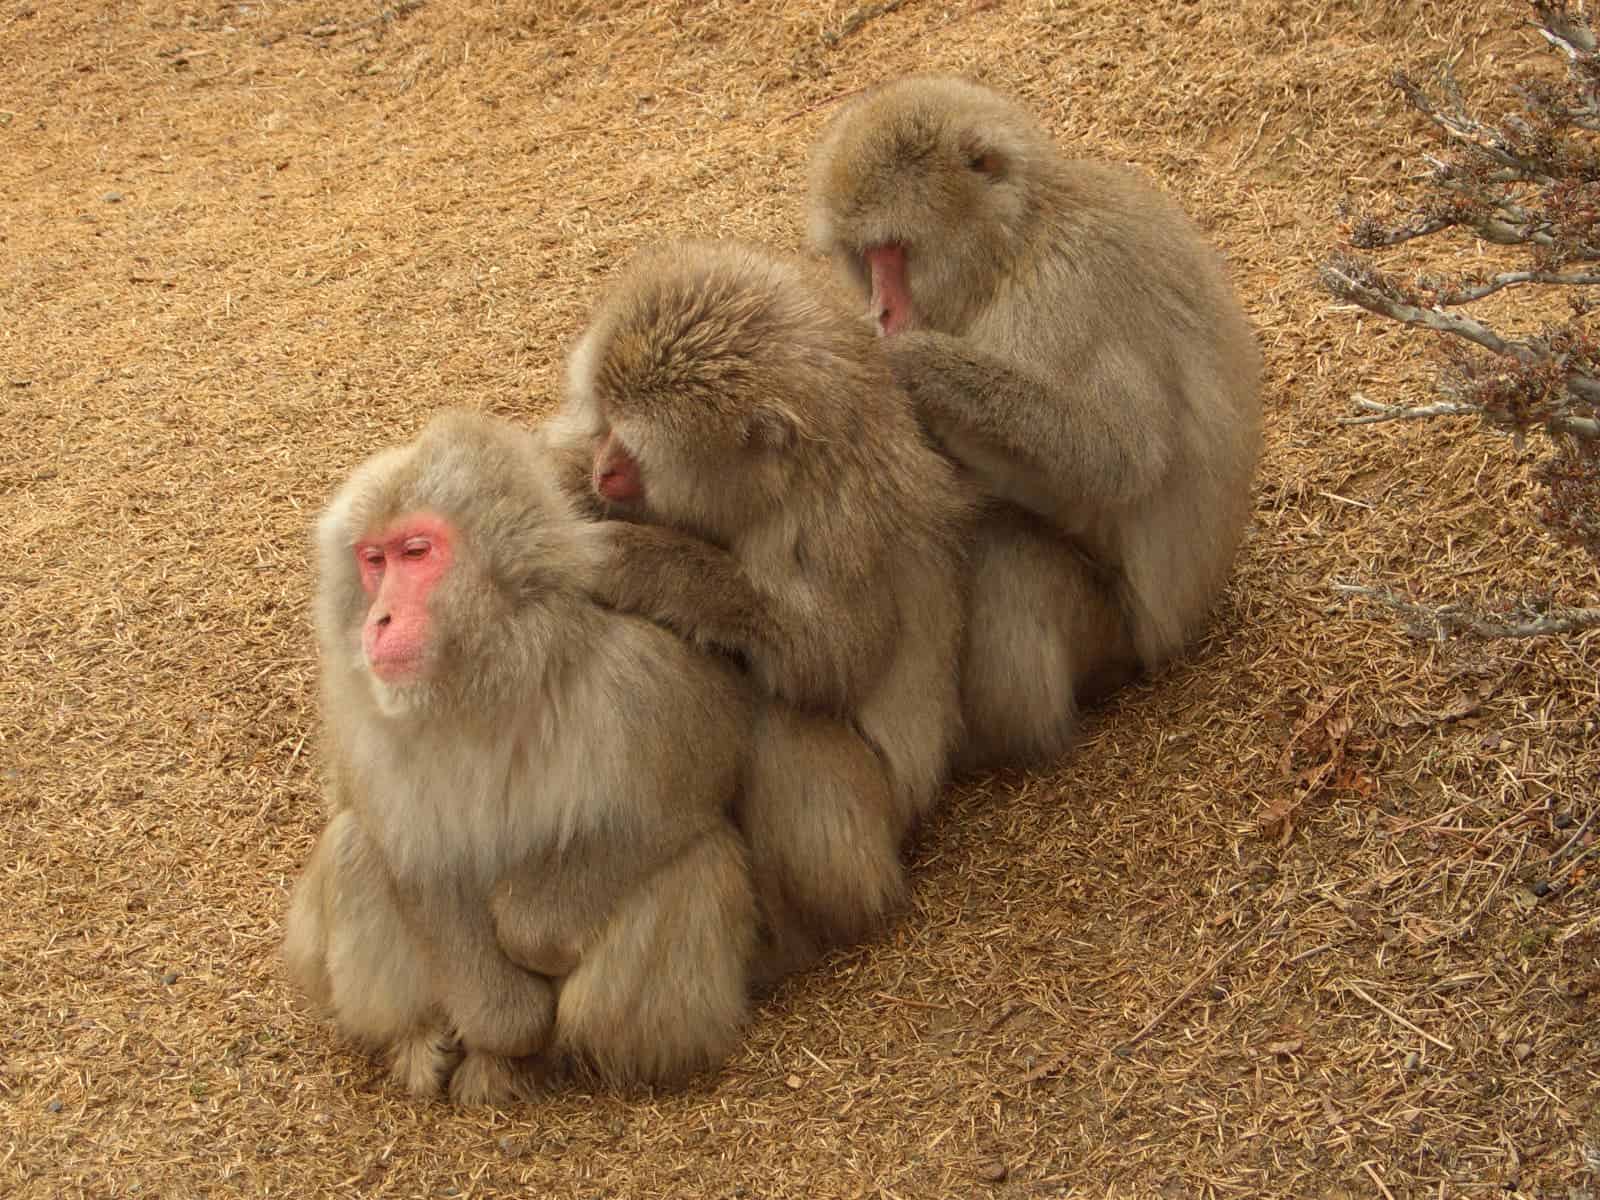 Grooming is an important aspect of the macaque social structure. Photo by Noneotuho.